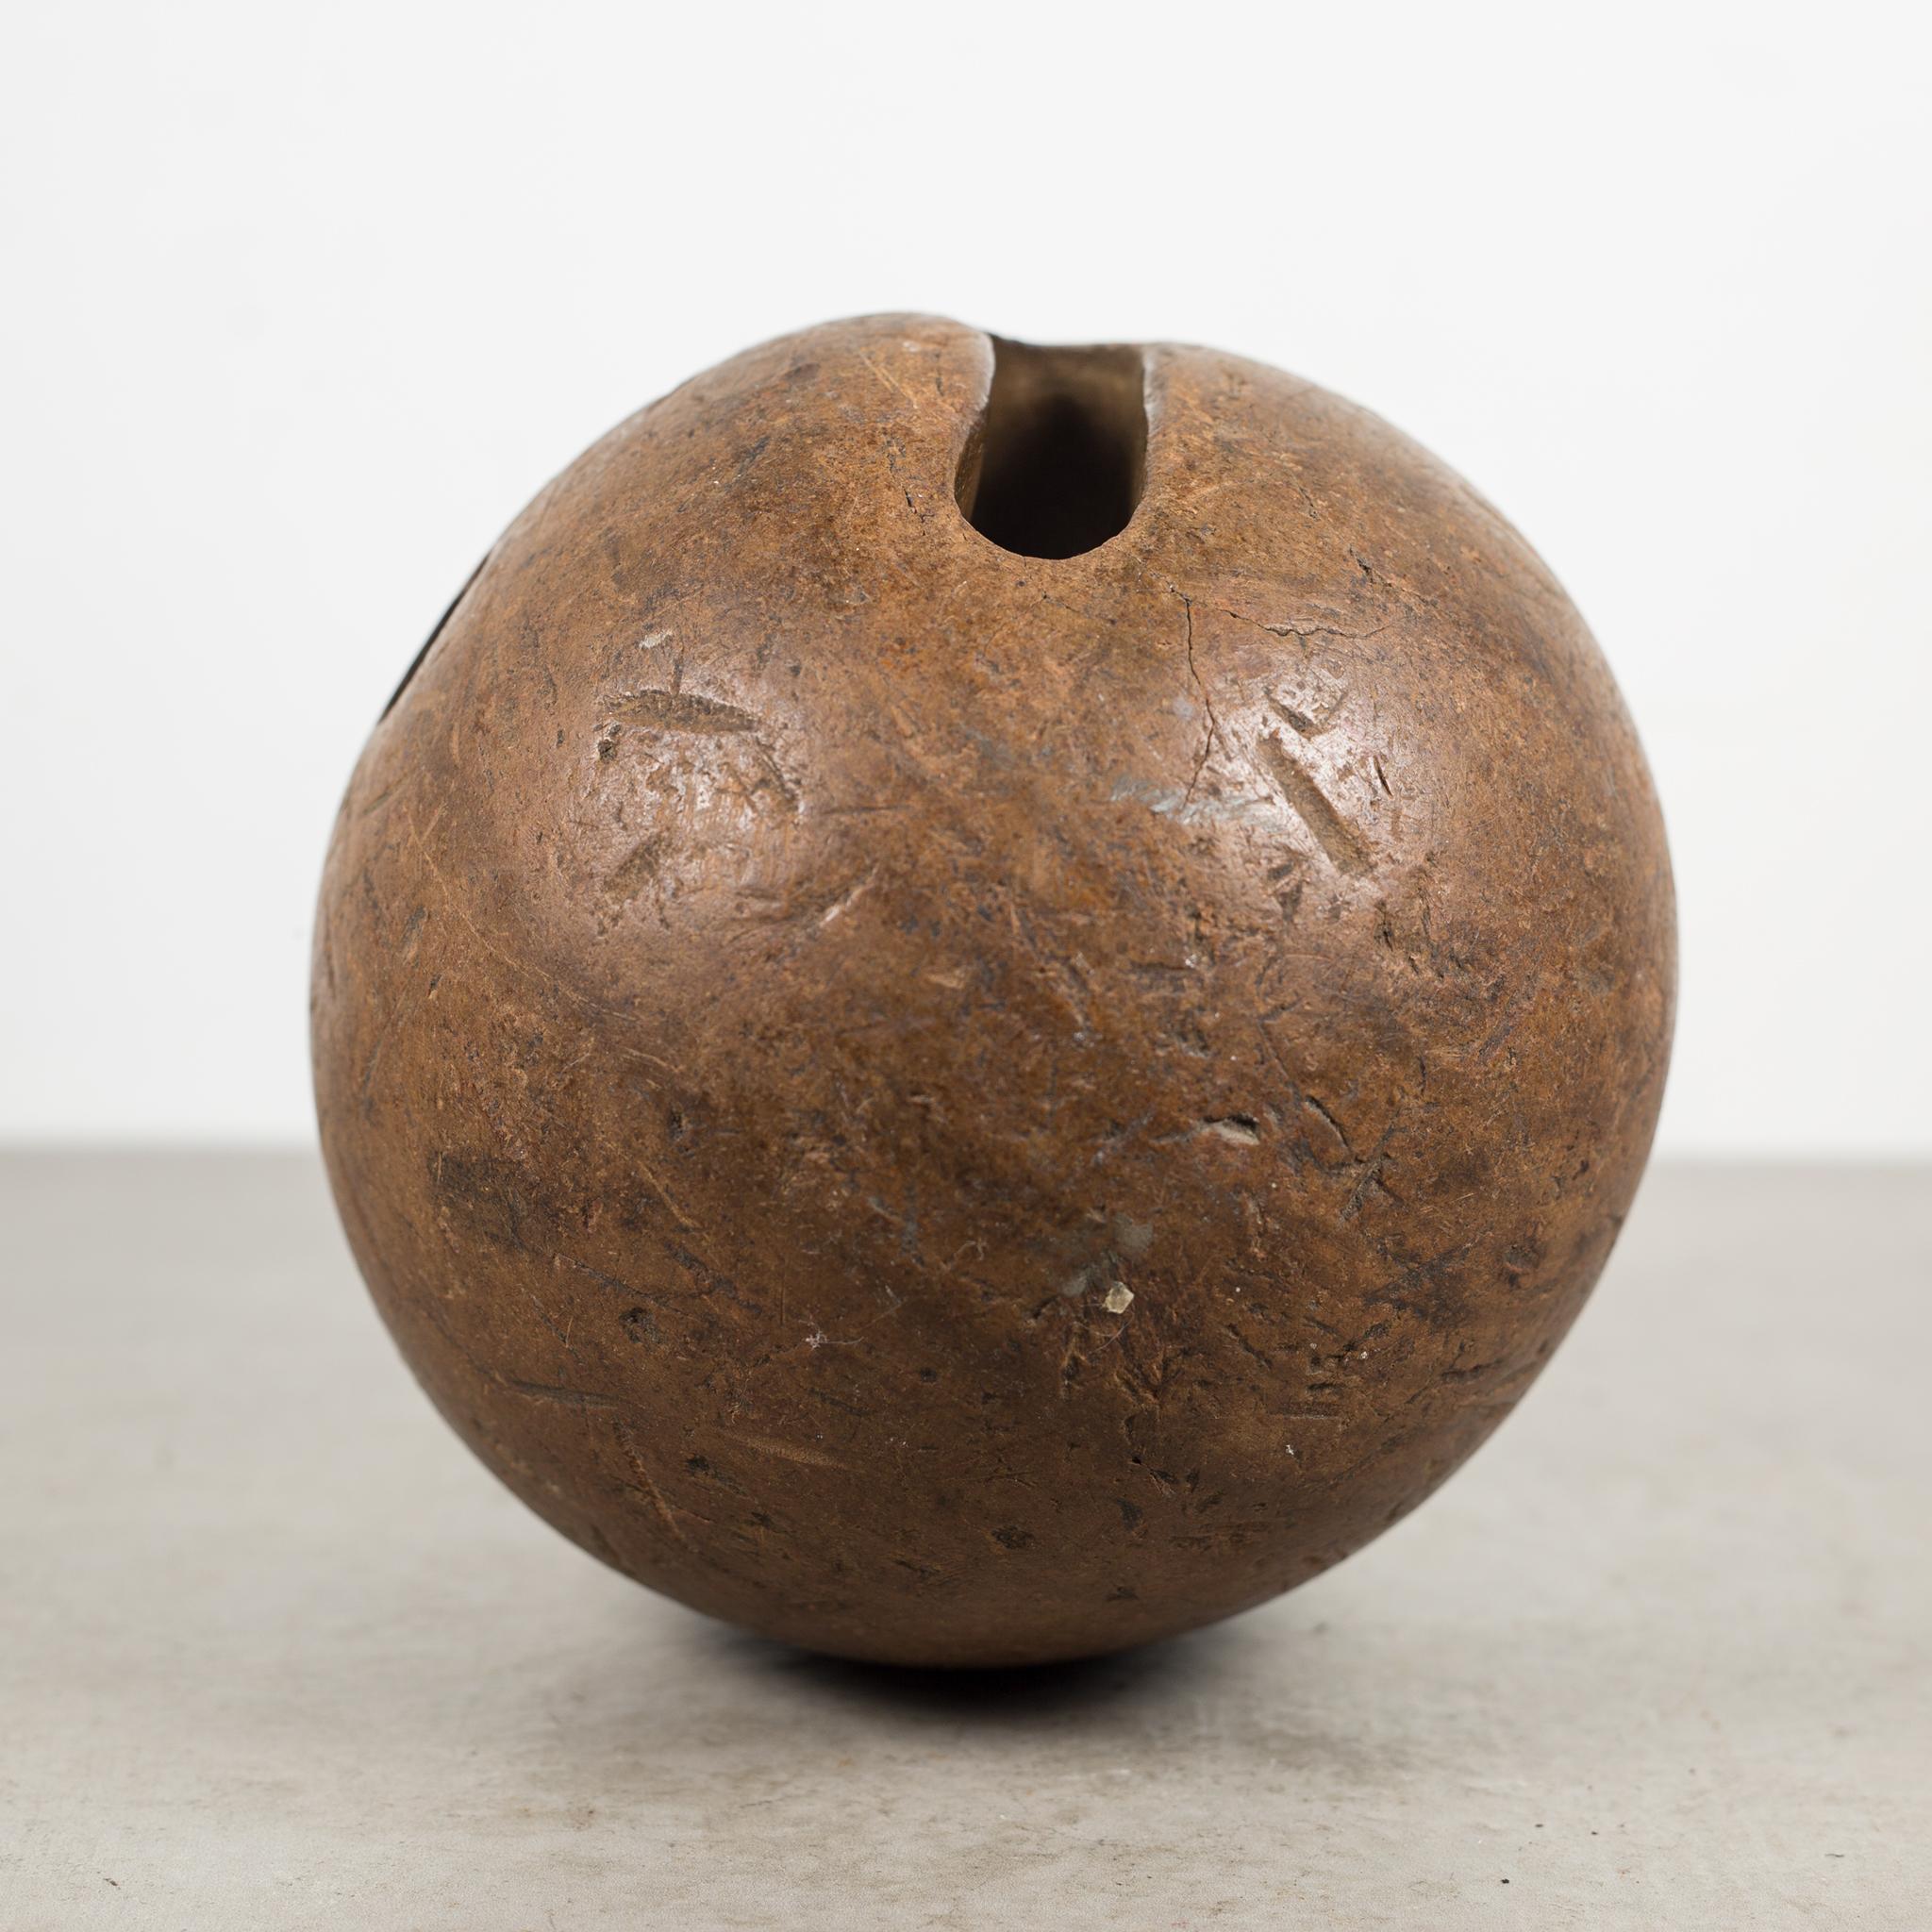 About

An original hand carved Victorian bowling ball made of extremely hard Lingum vitae wood.

 Creator: Unknown.
 Date of manufacture: circa 1800s.
 Materials and techniques: Lignum vitae.
 Condition: Good. Wear consistent with age and